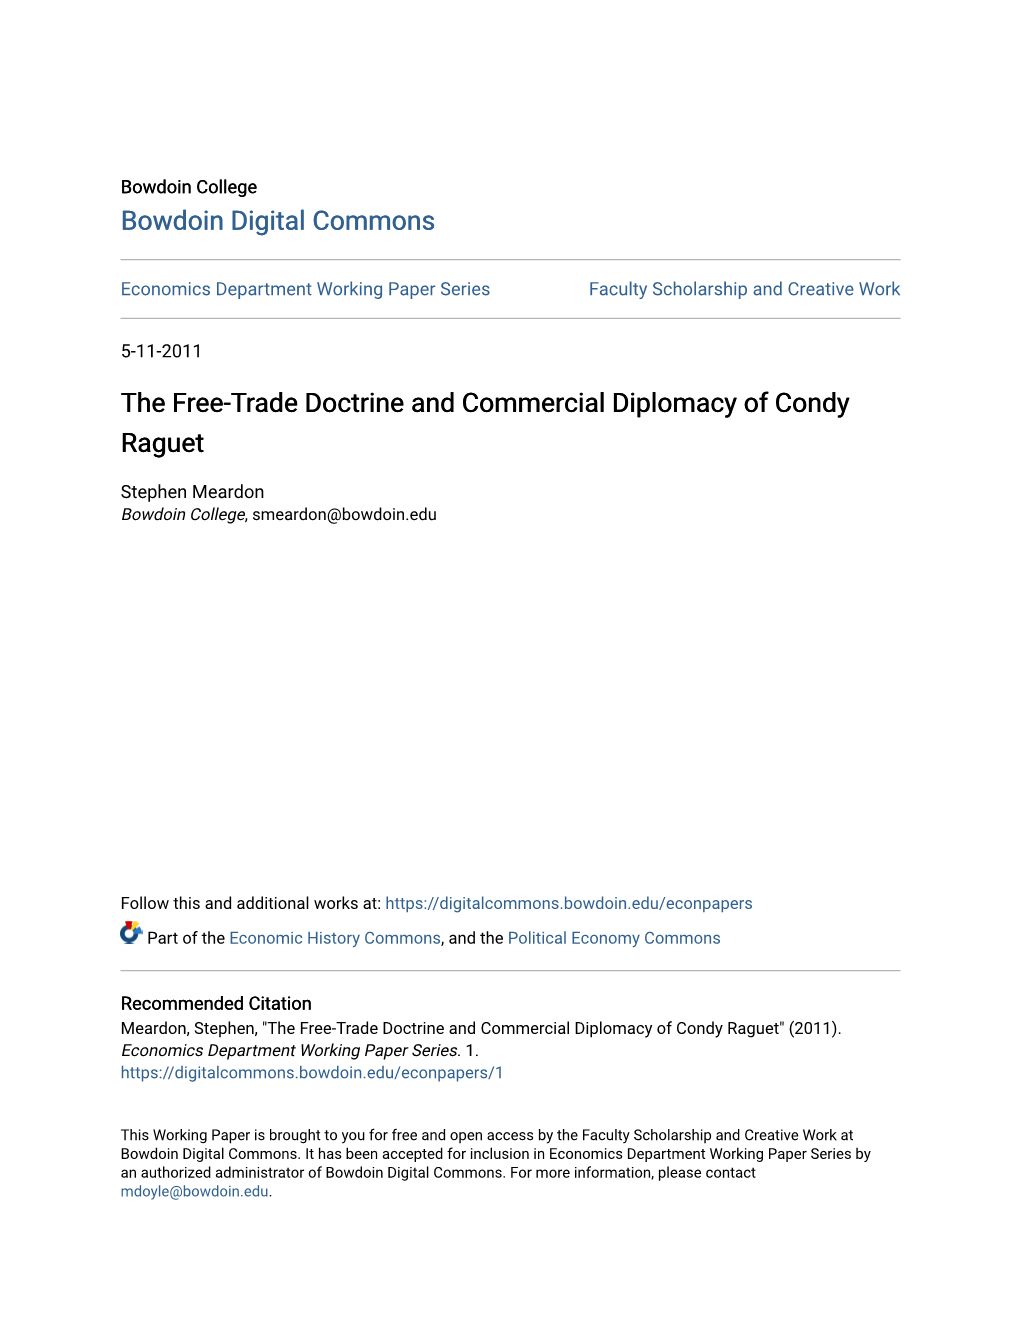 The Free-Trade Doctrine and Commercial Diplomacy of Condy Raguet